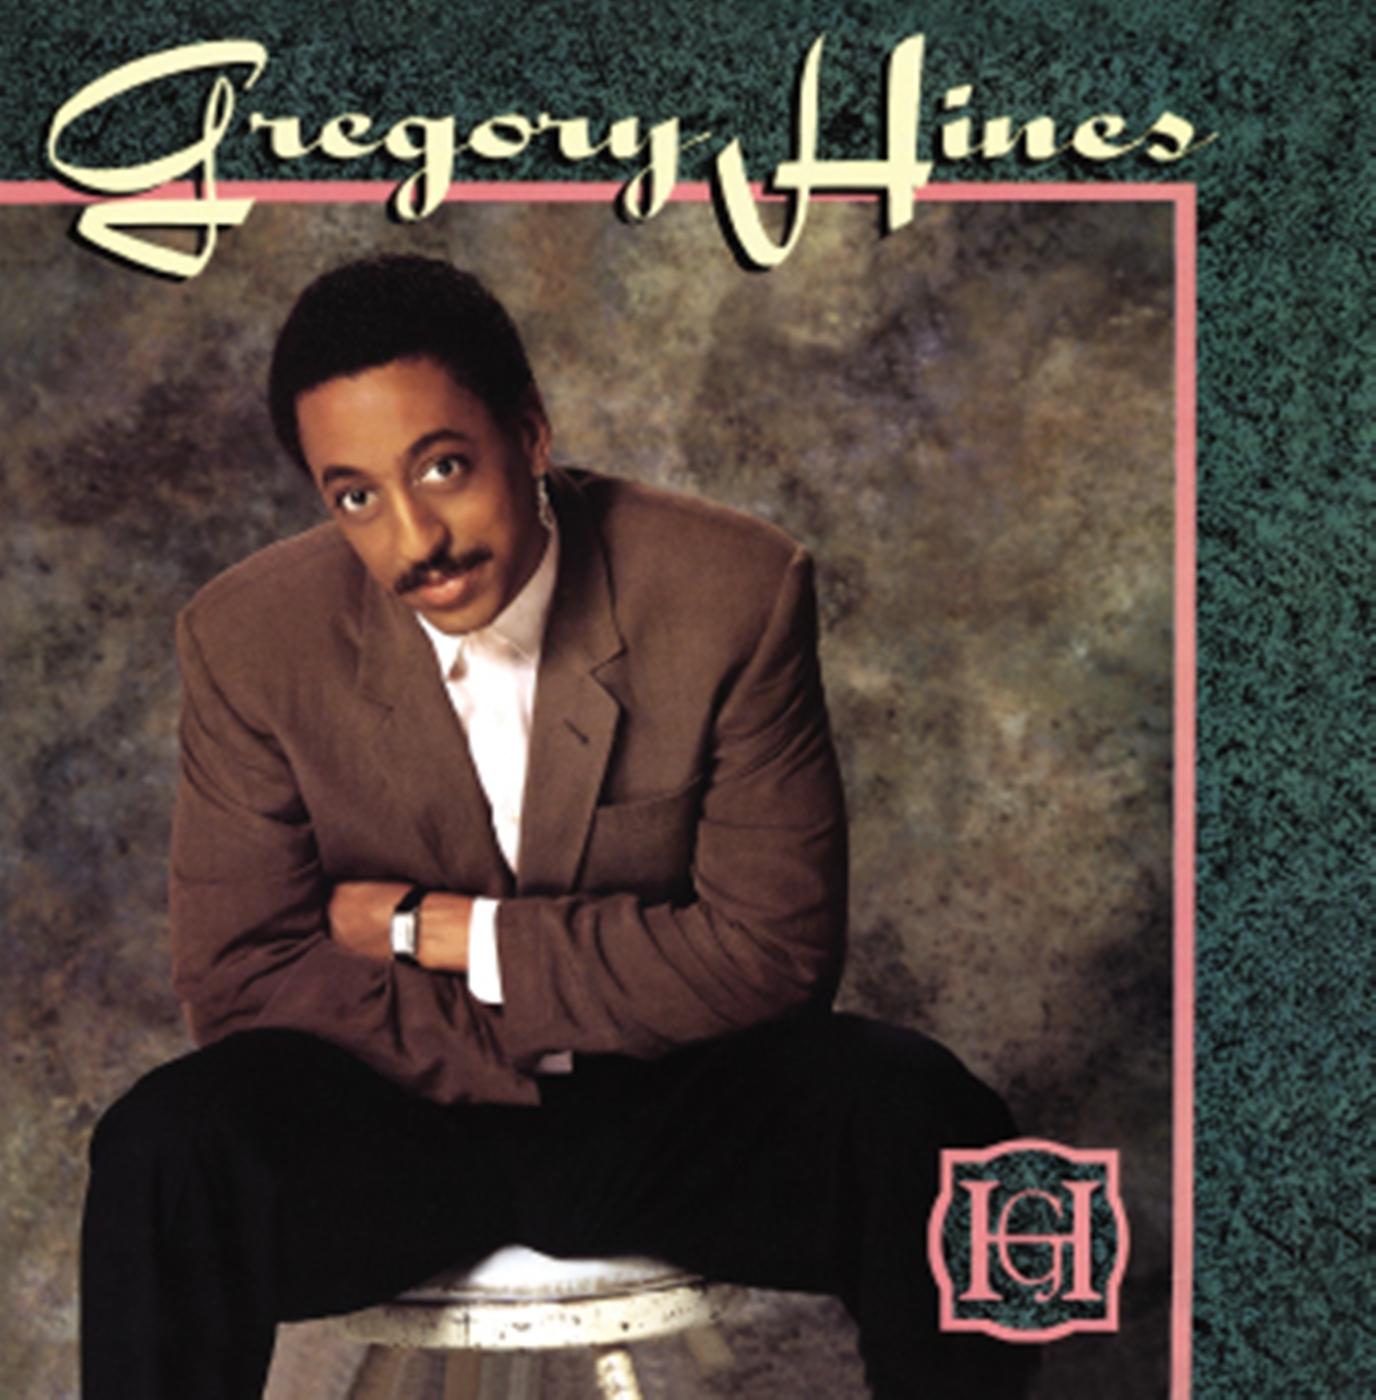 Gregory Hines/GREGORY HINES CD